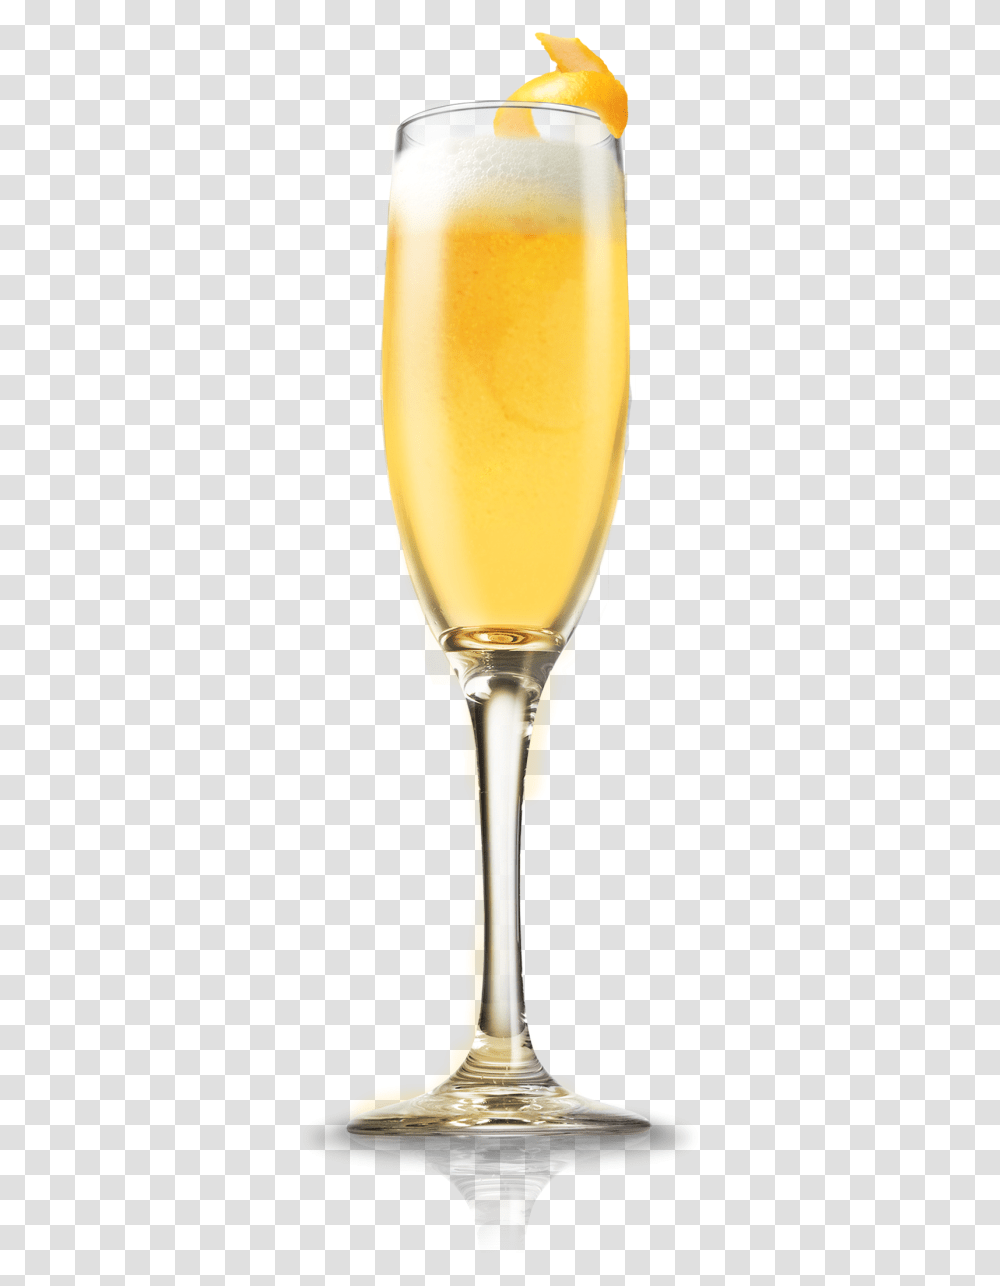 Mimosa, Lamp, Glass, Beer, Alcohol Transparent Png